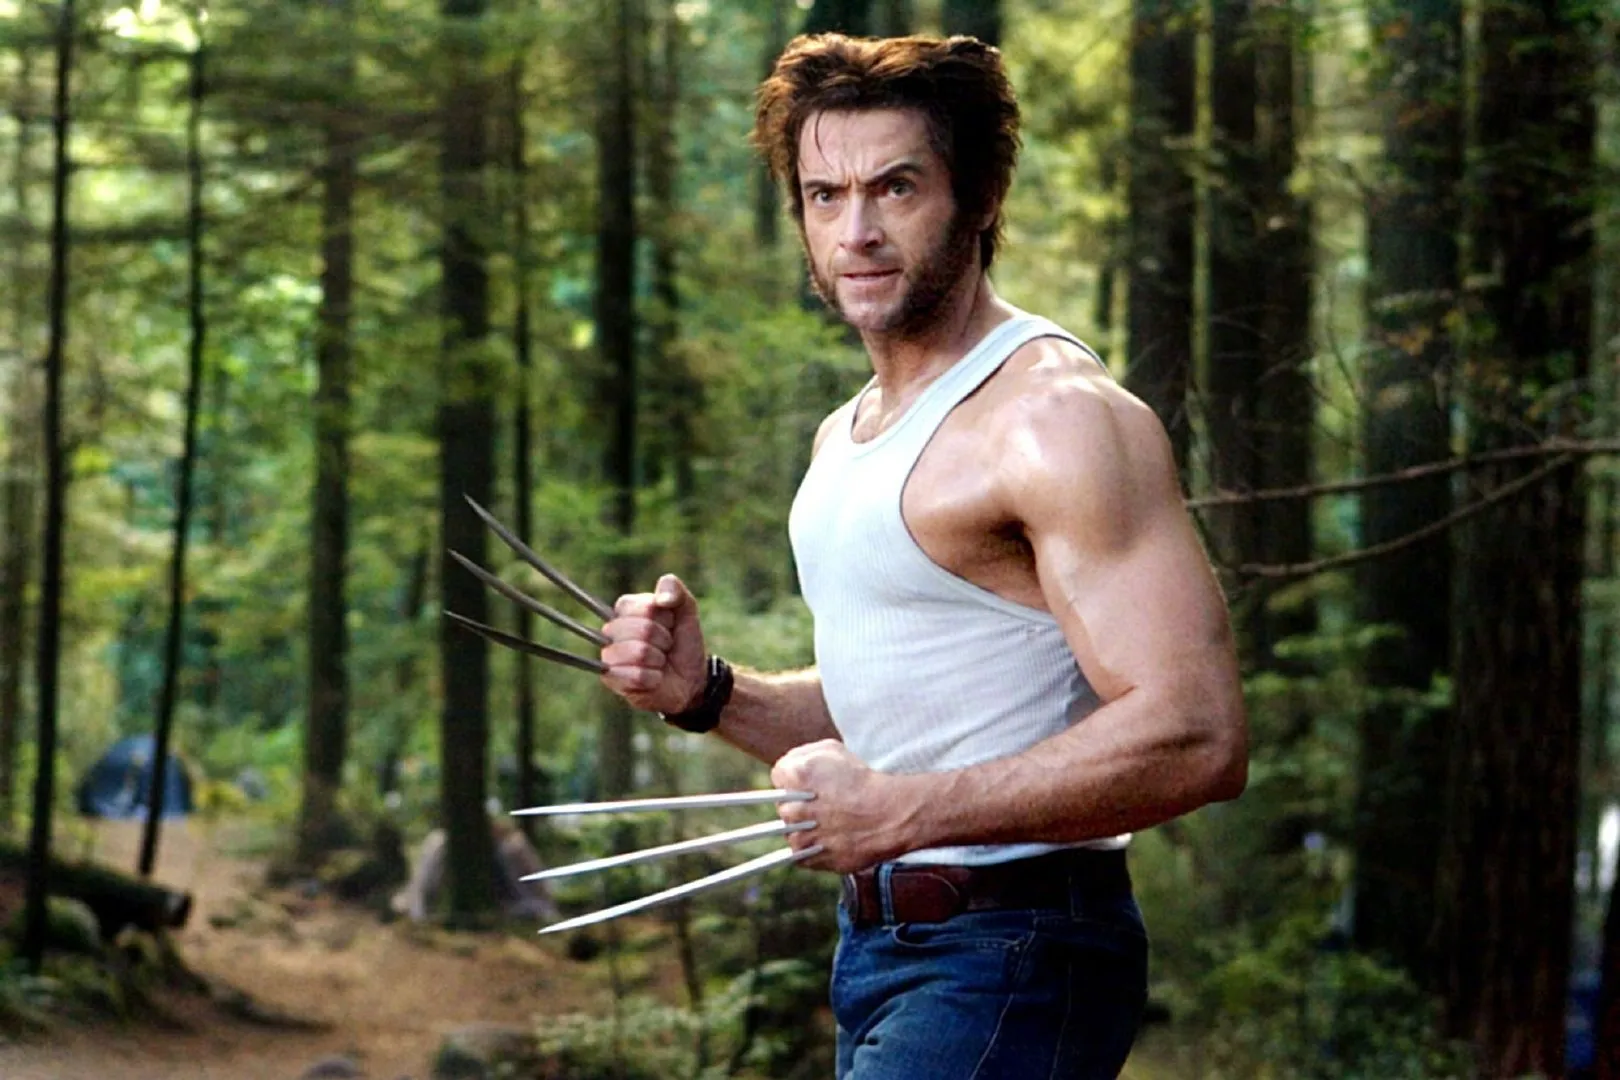 Taron Egerton has discussed with Marvel to play Wolverine | FMV6